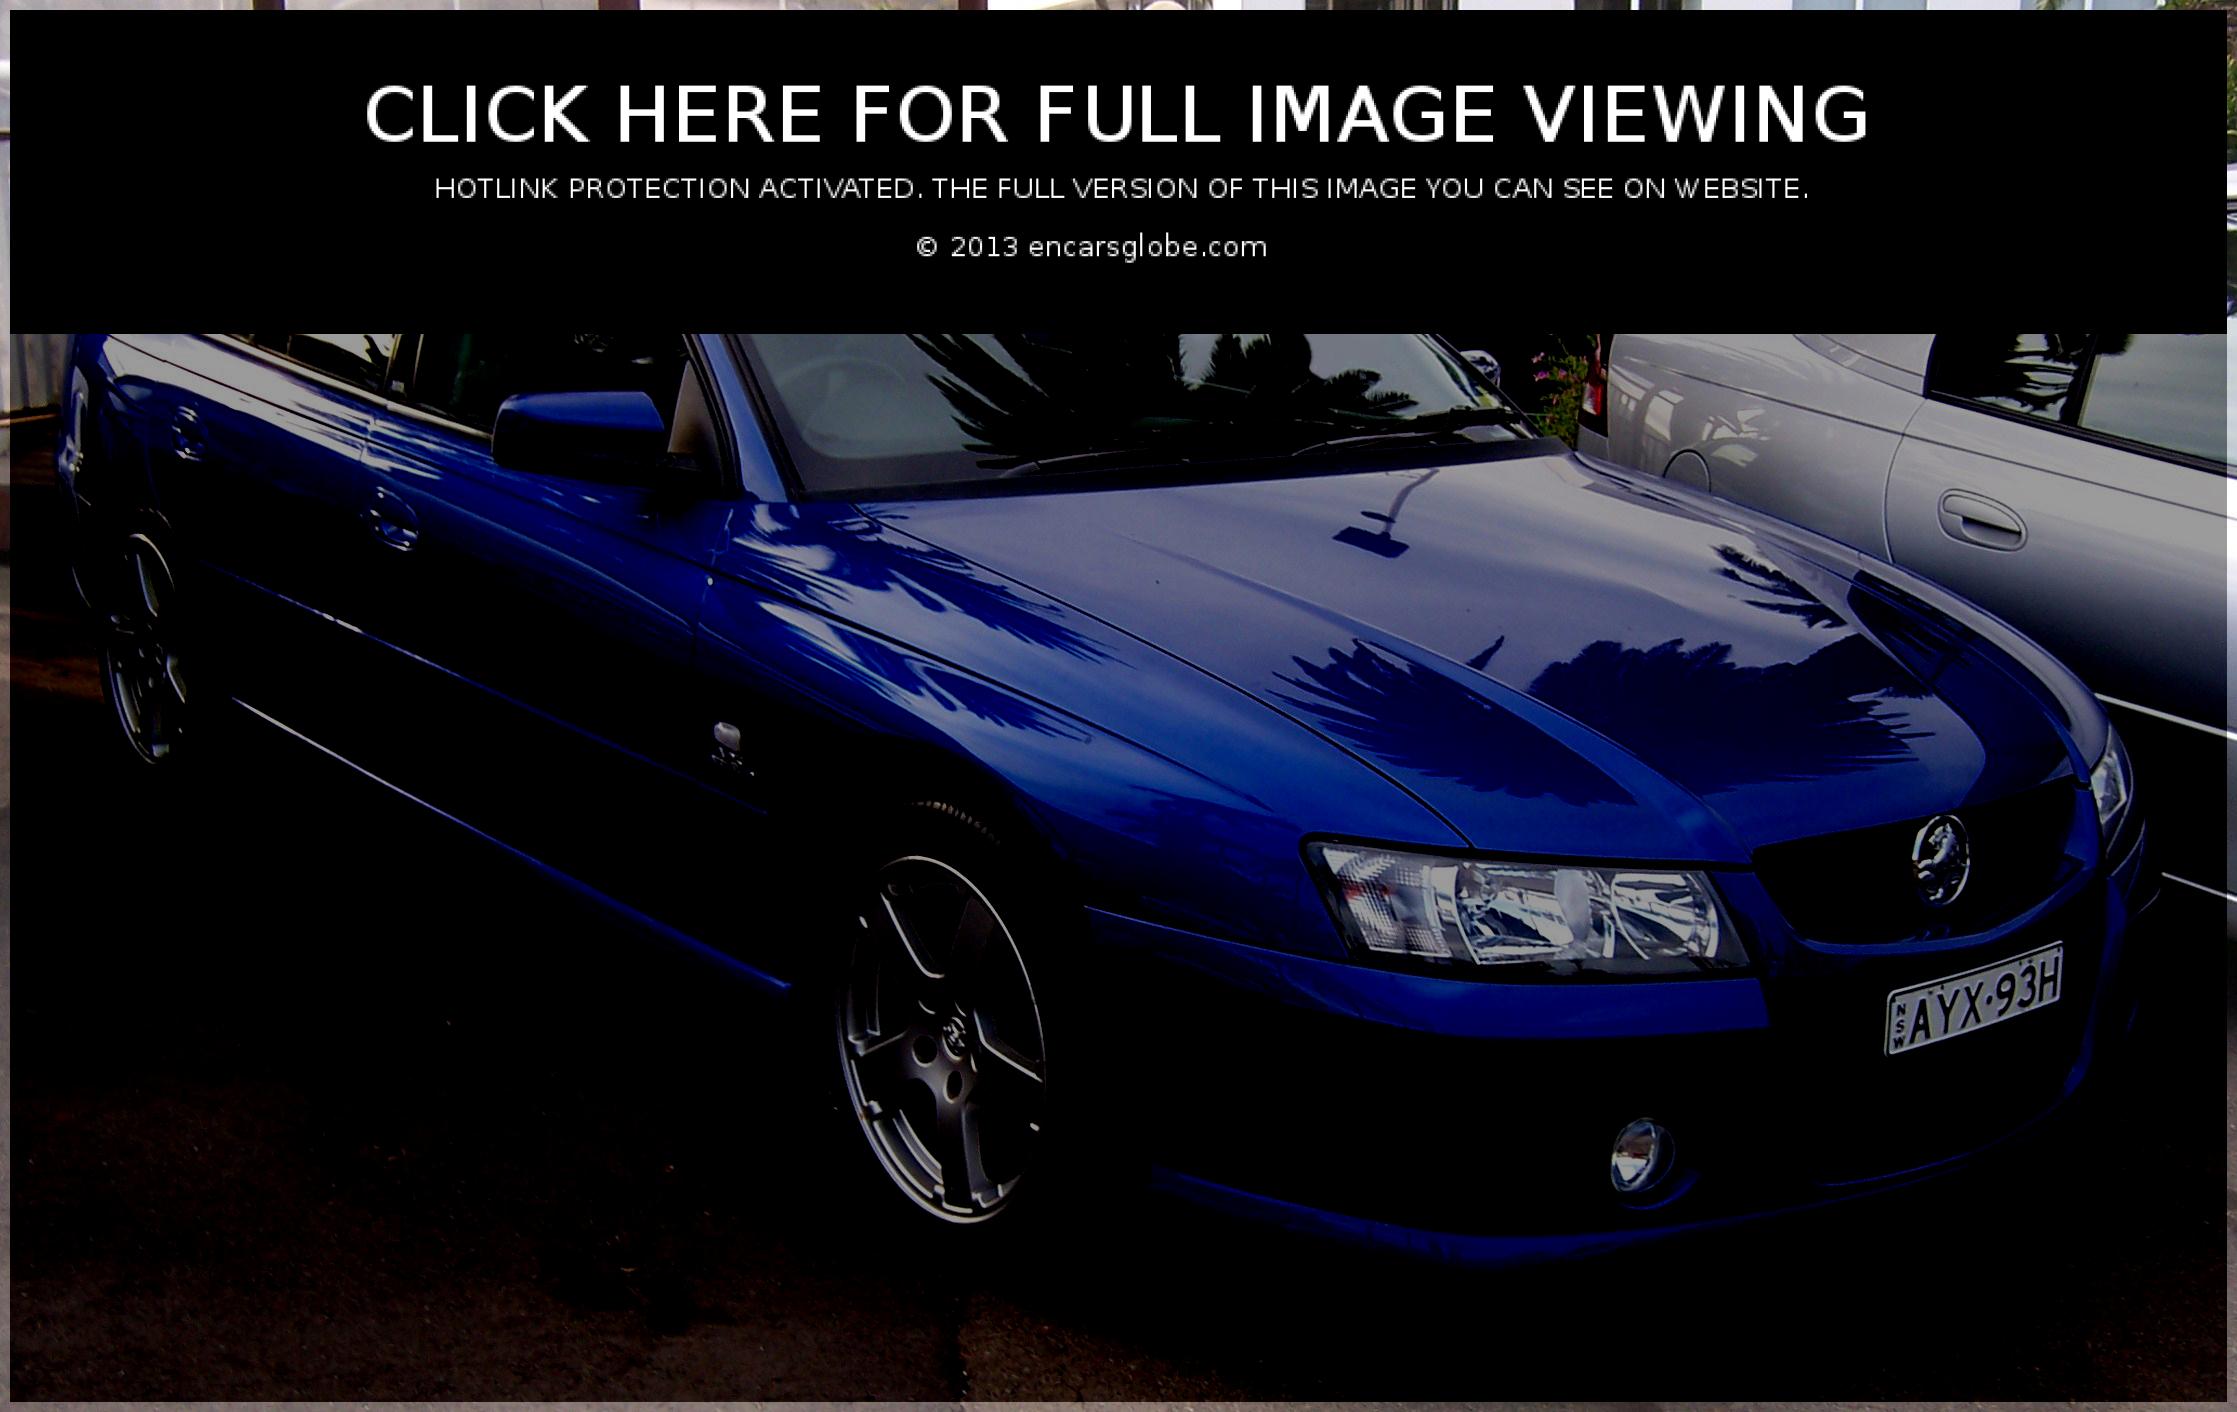 Gallery of all models of Holden: Holden Commodore Adventra AWD,